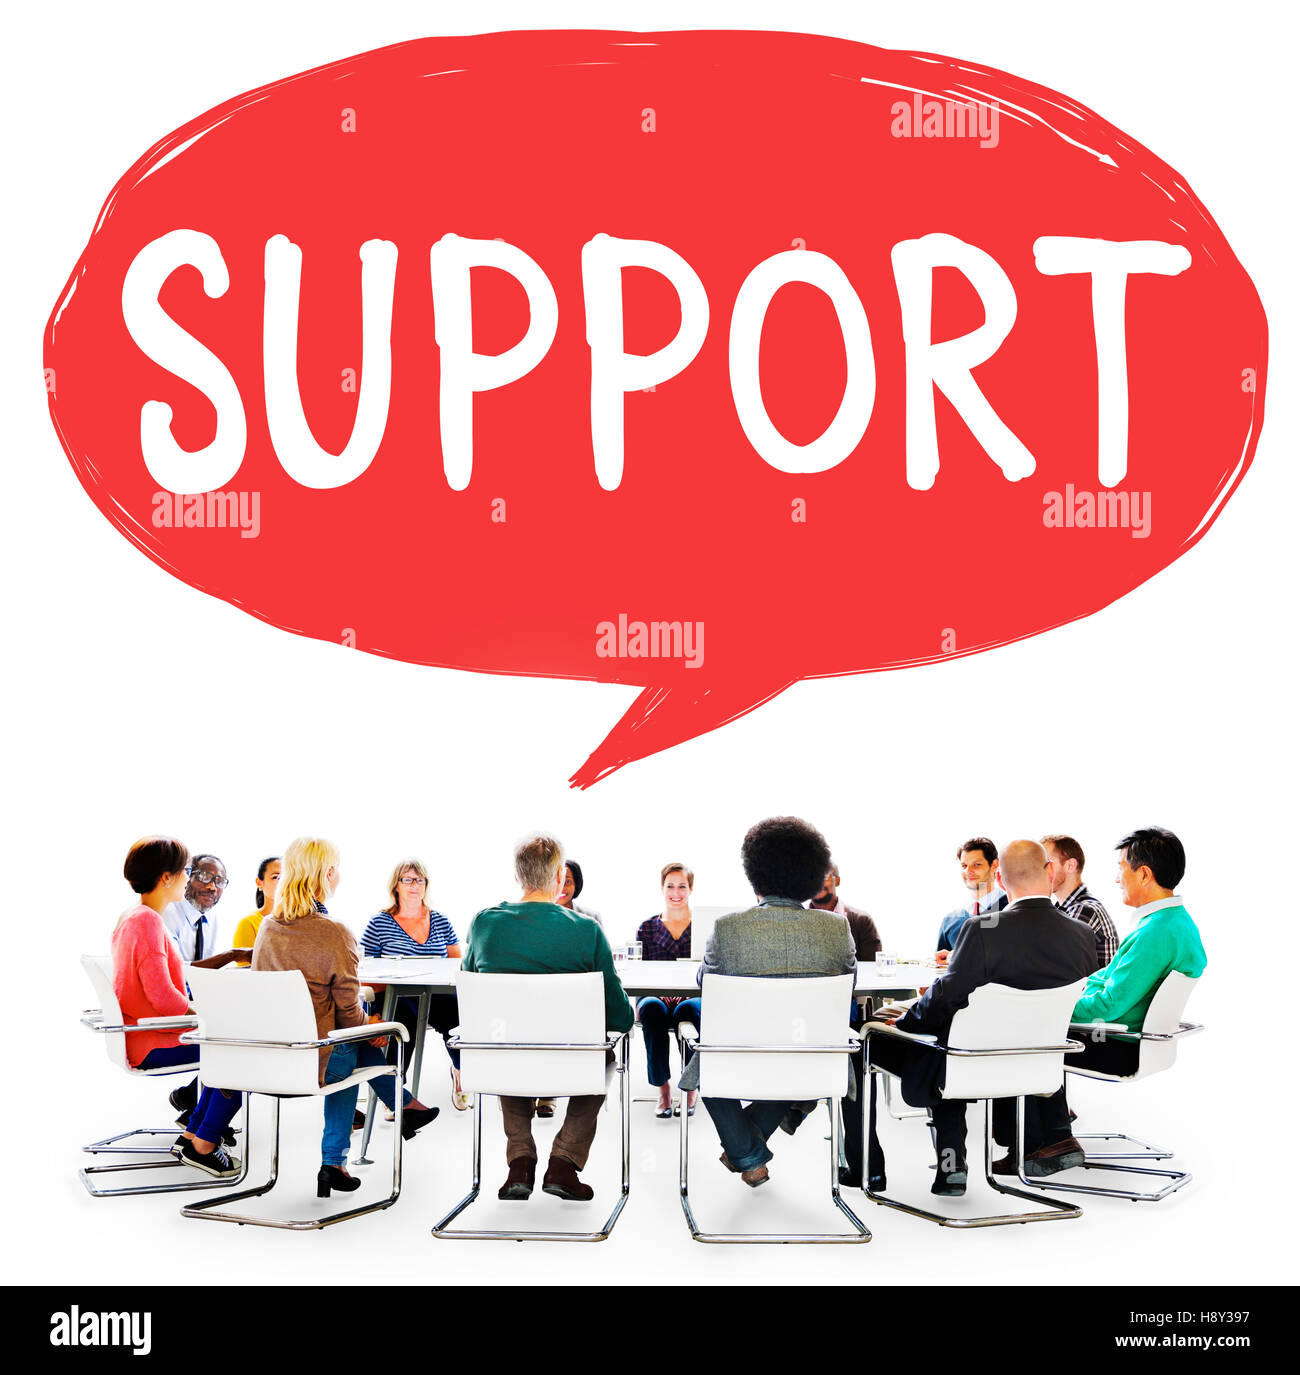 Support Service Help Assistance Guidance Concept Stock Photo